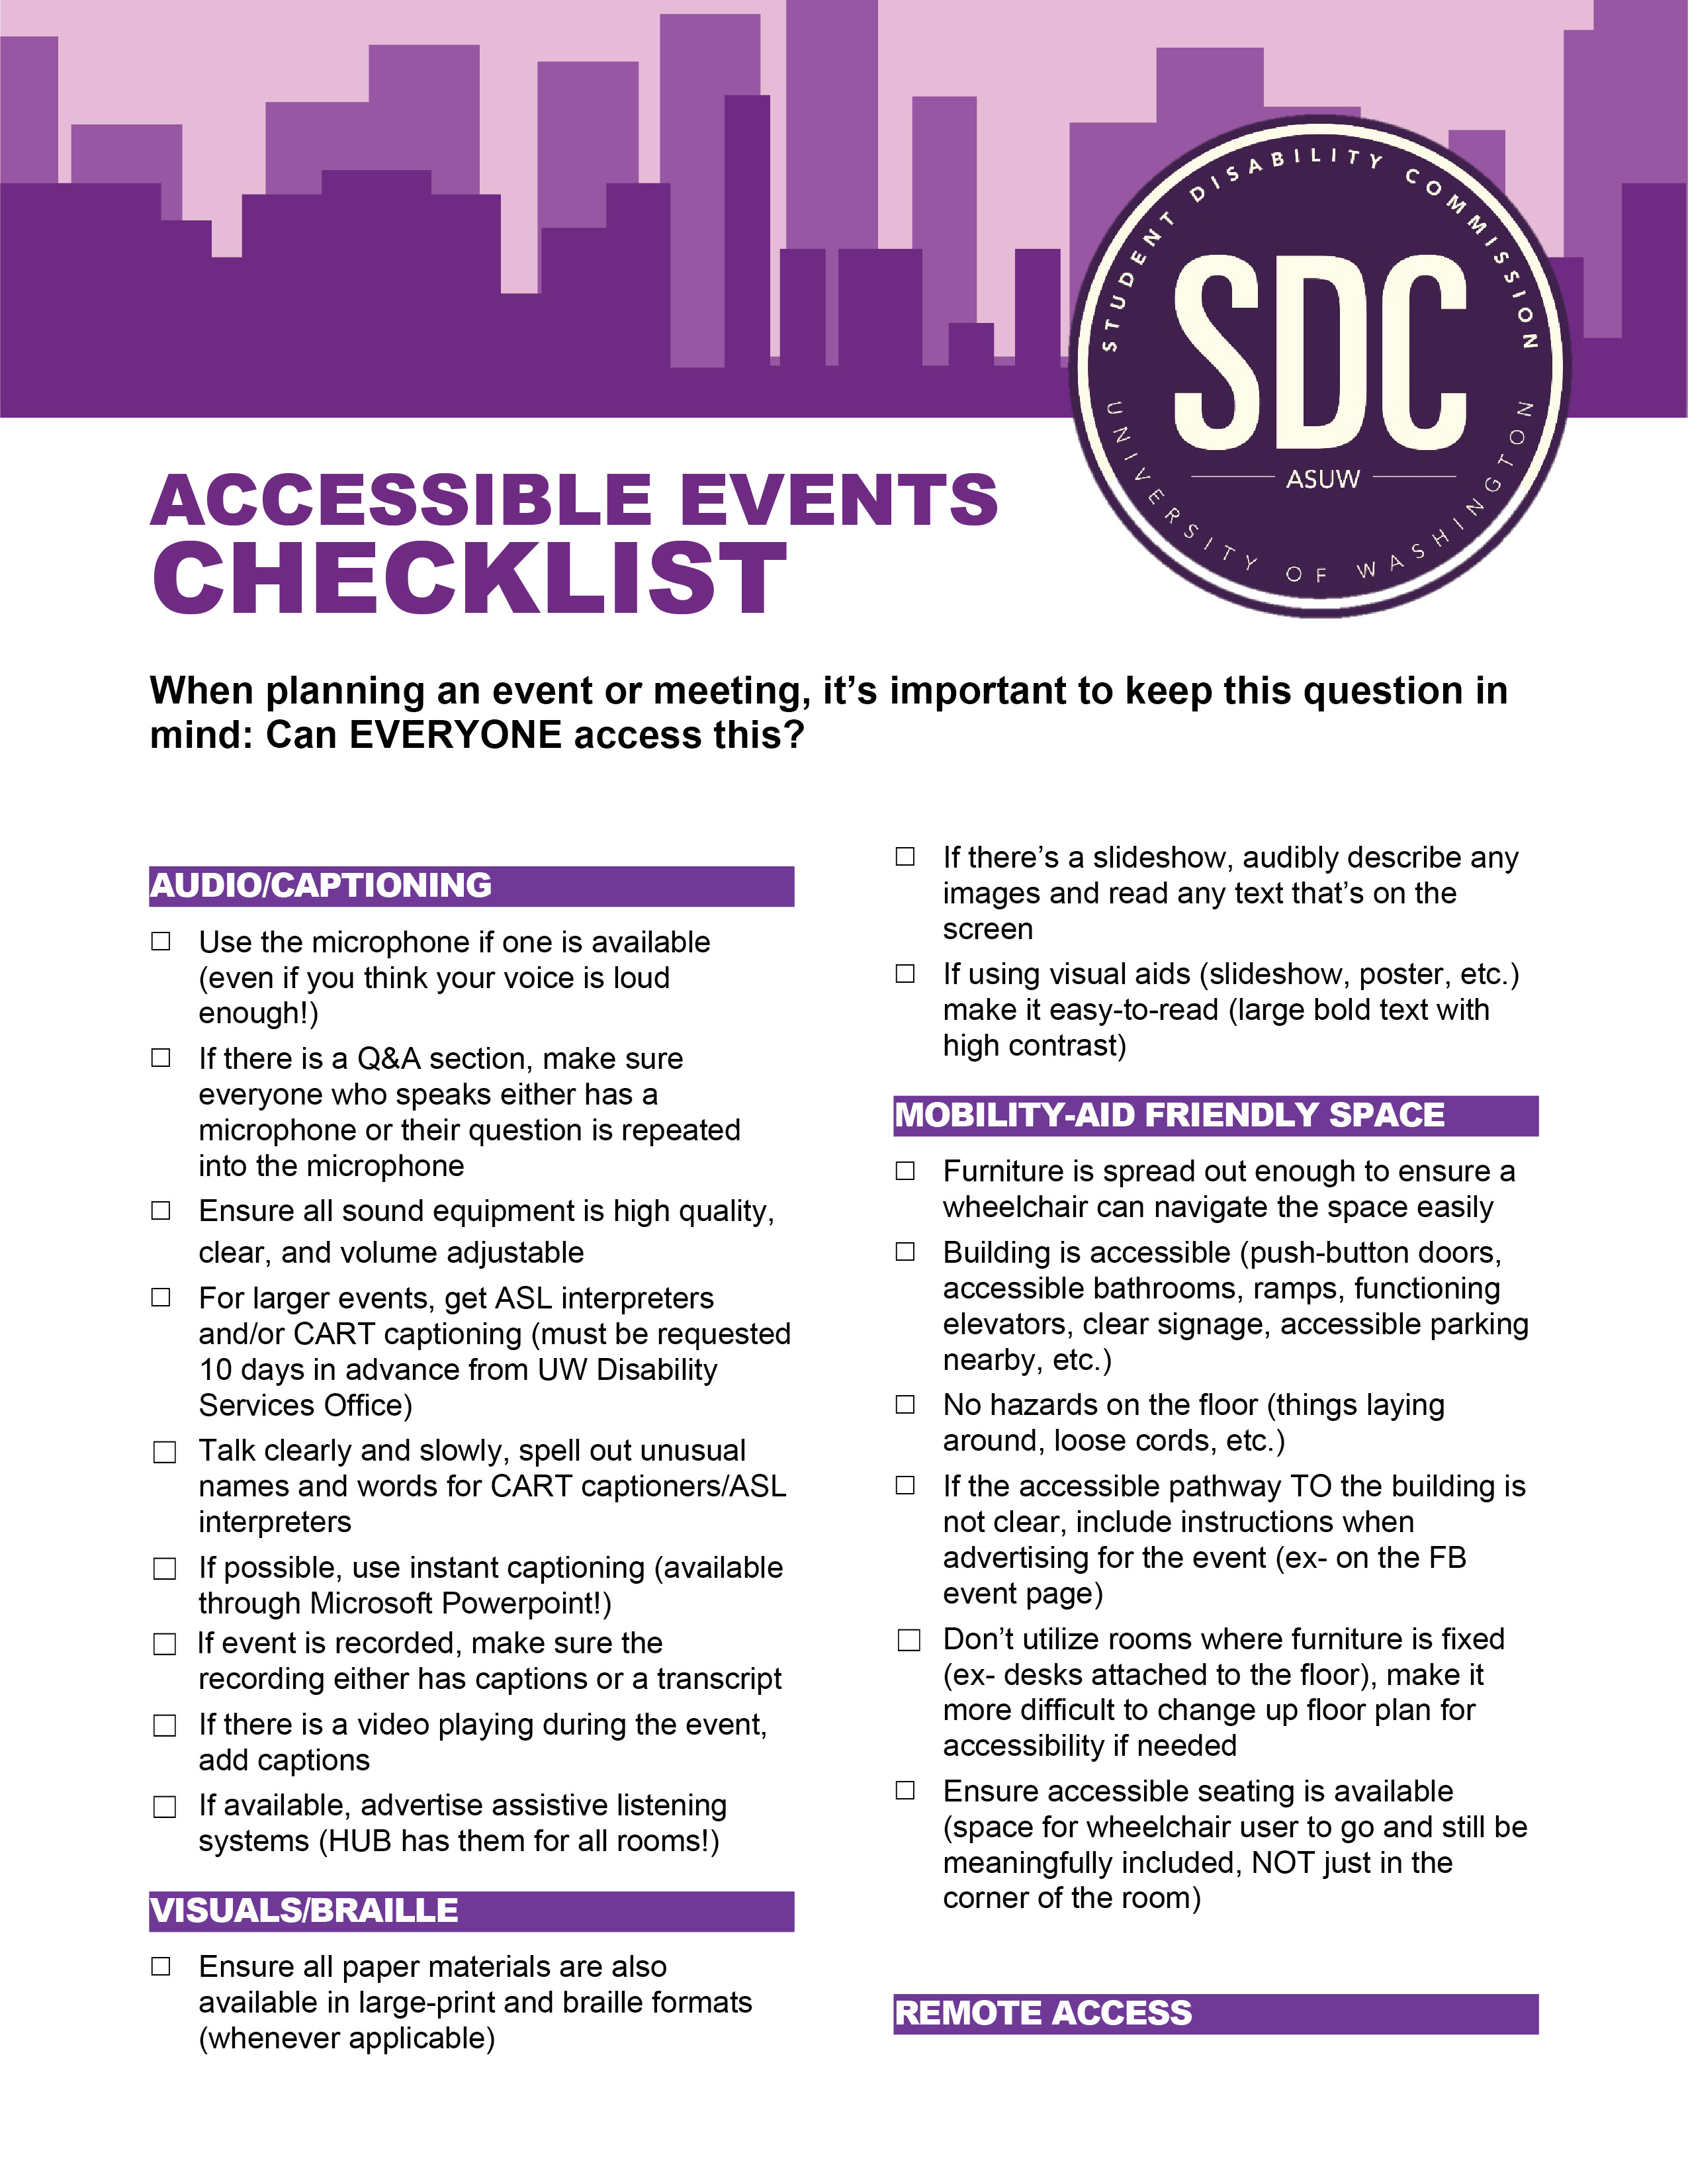 Checklist of actions to make events accessible